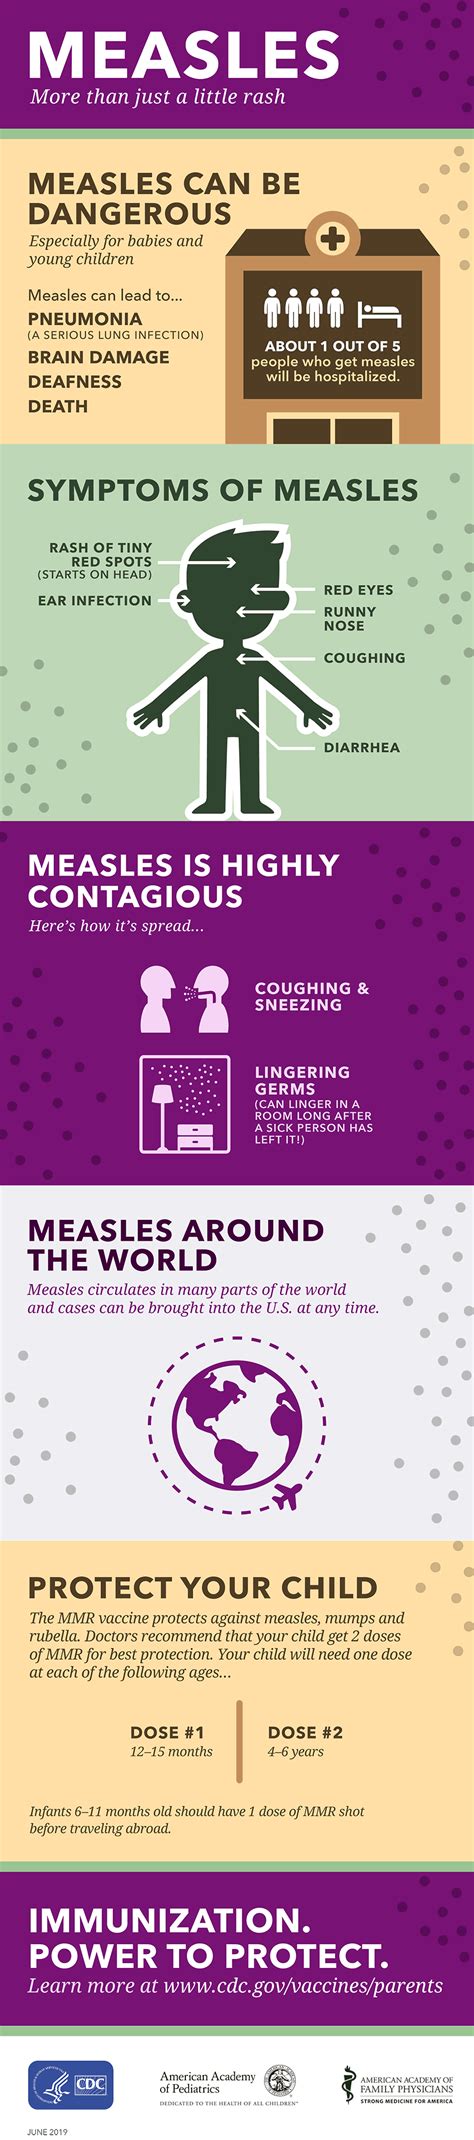 Parents Measles Infographic Vaccine Preventable Diseases Cdc